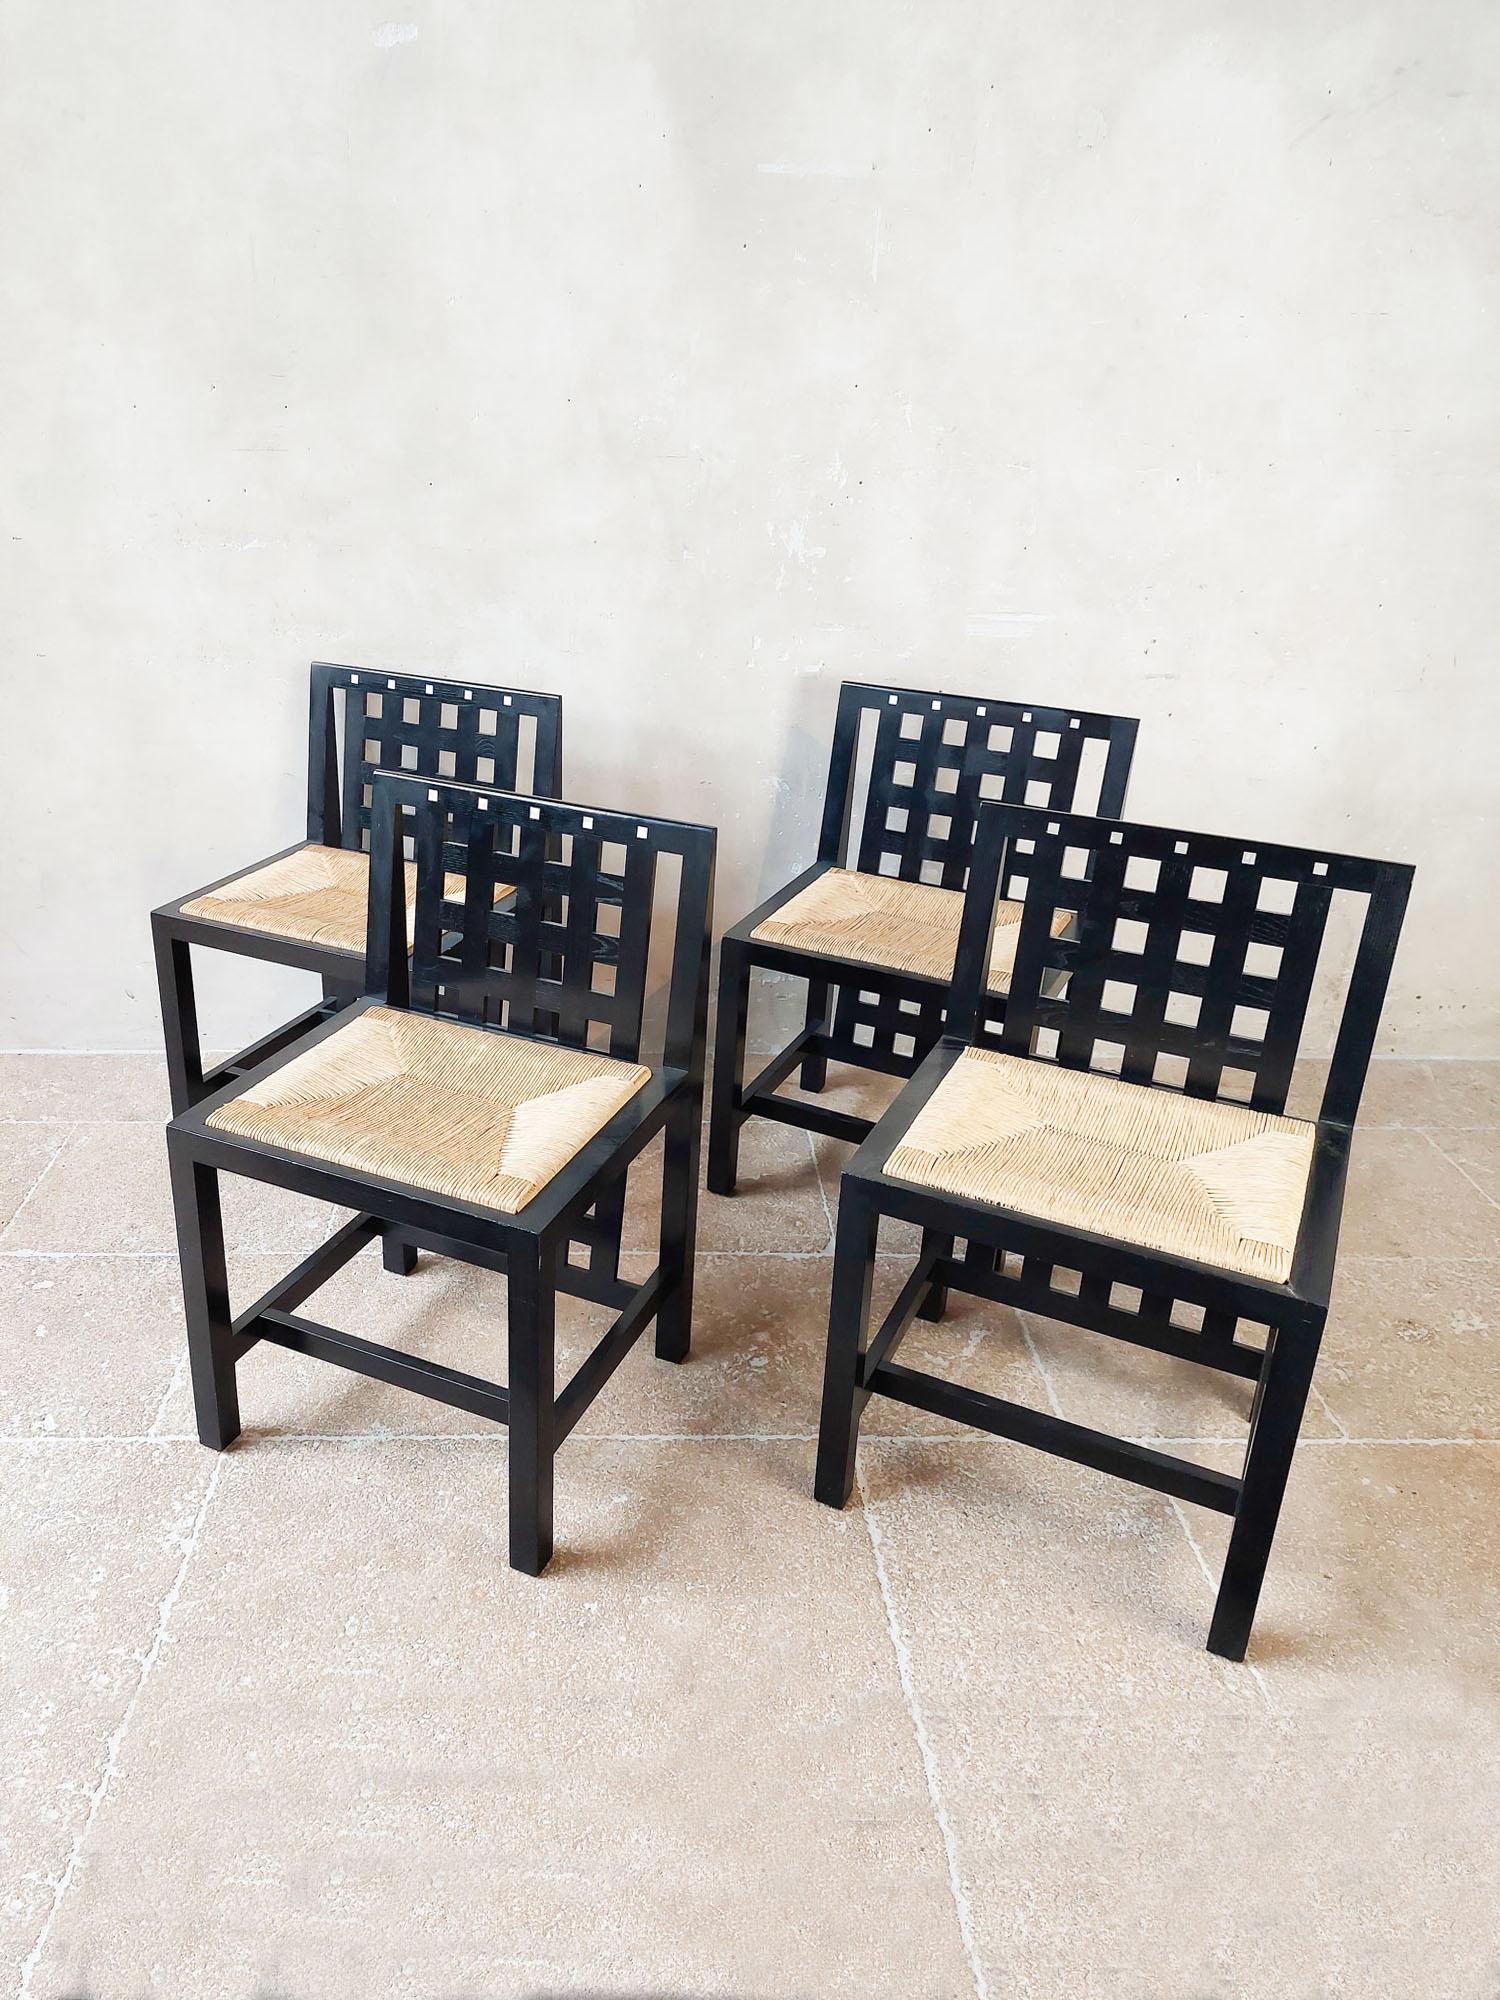 1970s Italian Black Oval Folding Table and Four Chairs designed by Mackintosh  For Sale 8